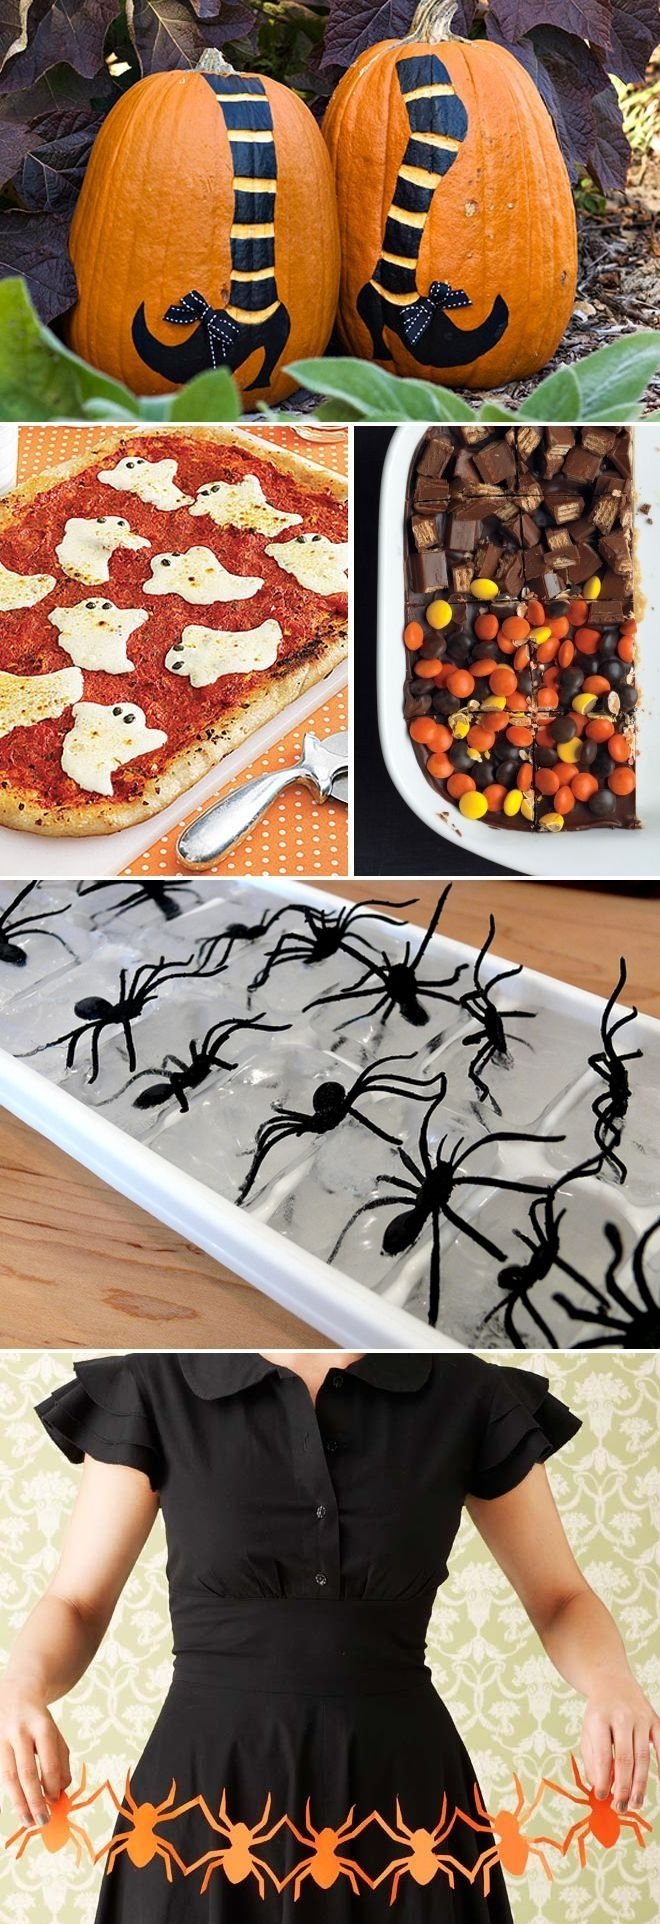 10 Nice Ideas For A Halloween Party 629 best halloween party ideas images on pinterest halloween prop 5 2023